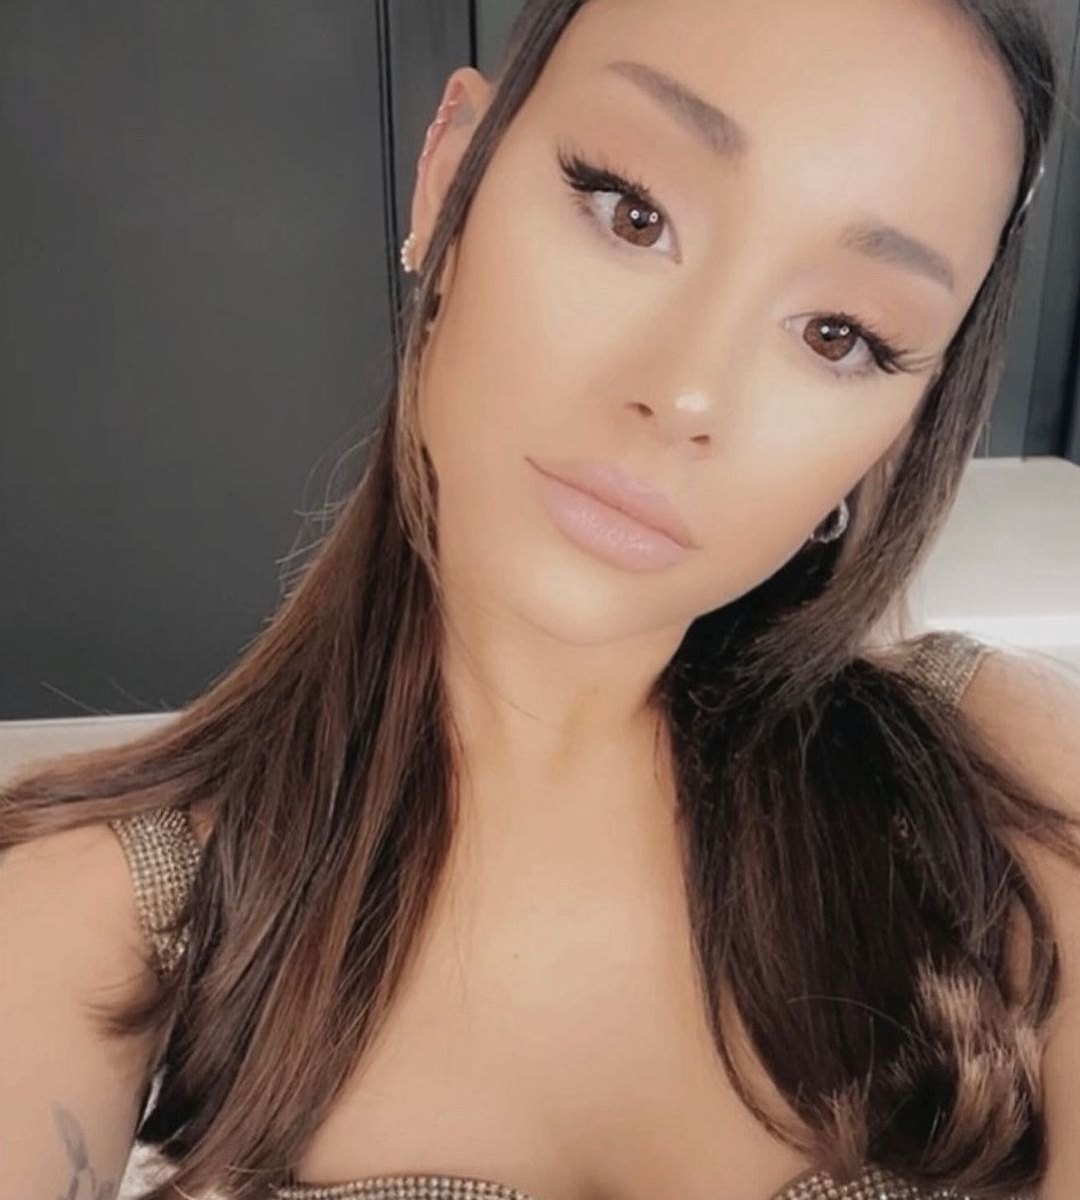 Ariana Grande Hair Down: See The Singer Without Her Ponytail